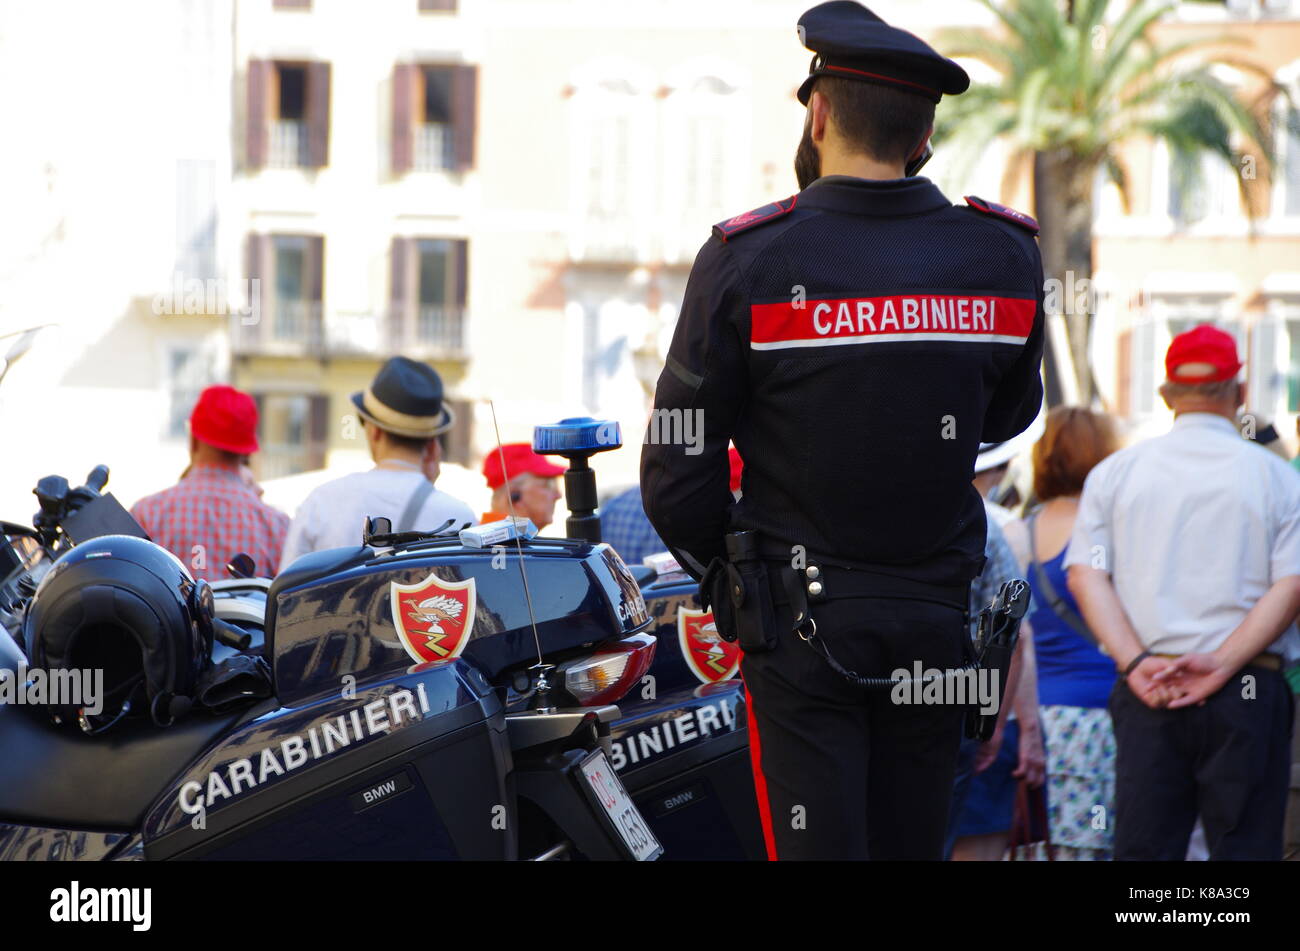 Rome, Italy - June 15 2017: Carabinieri military officer on duty in Spanish Steps in Rome, Italy Stock Photo